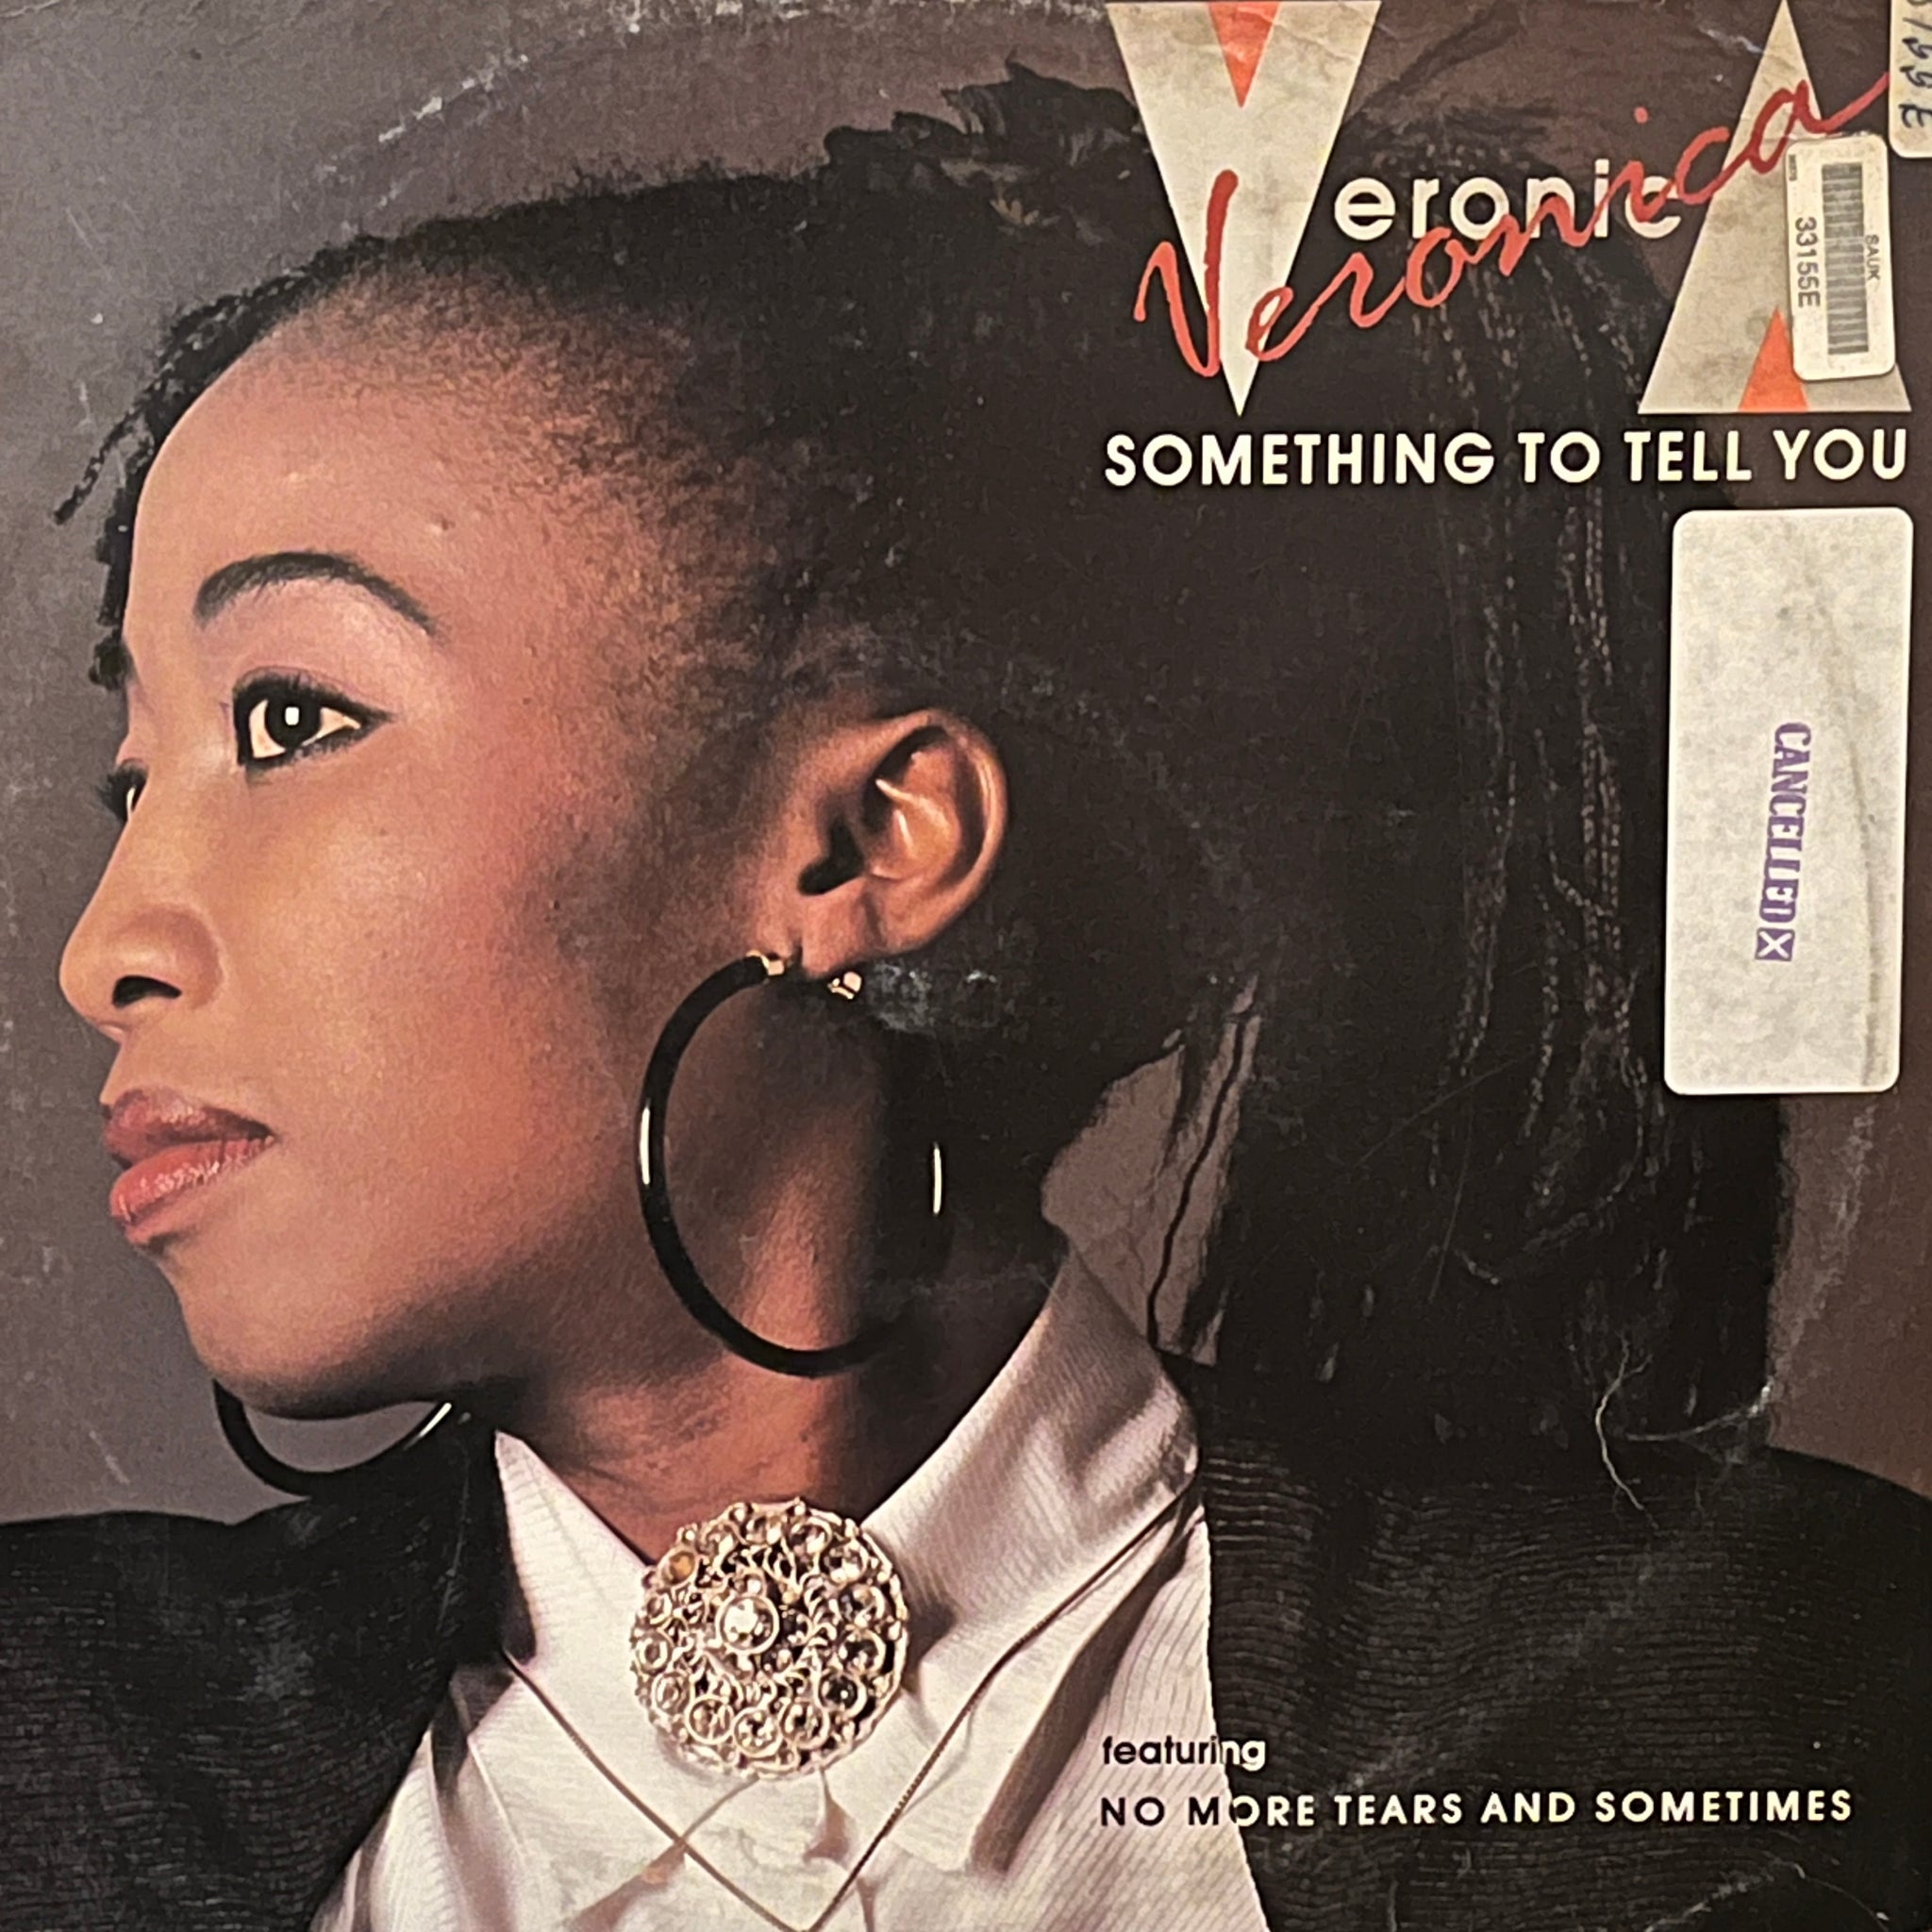 Veronica – Something To Tell You